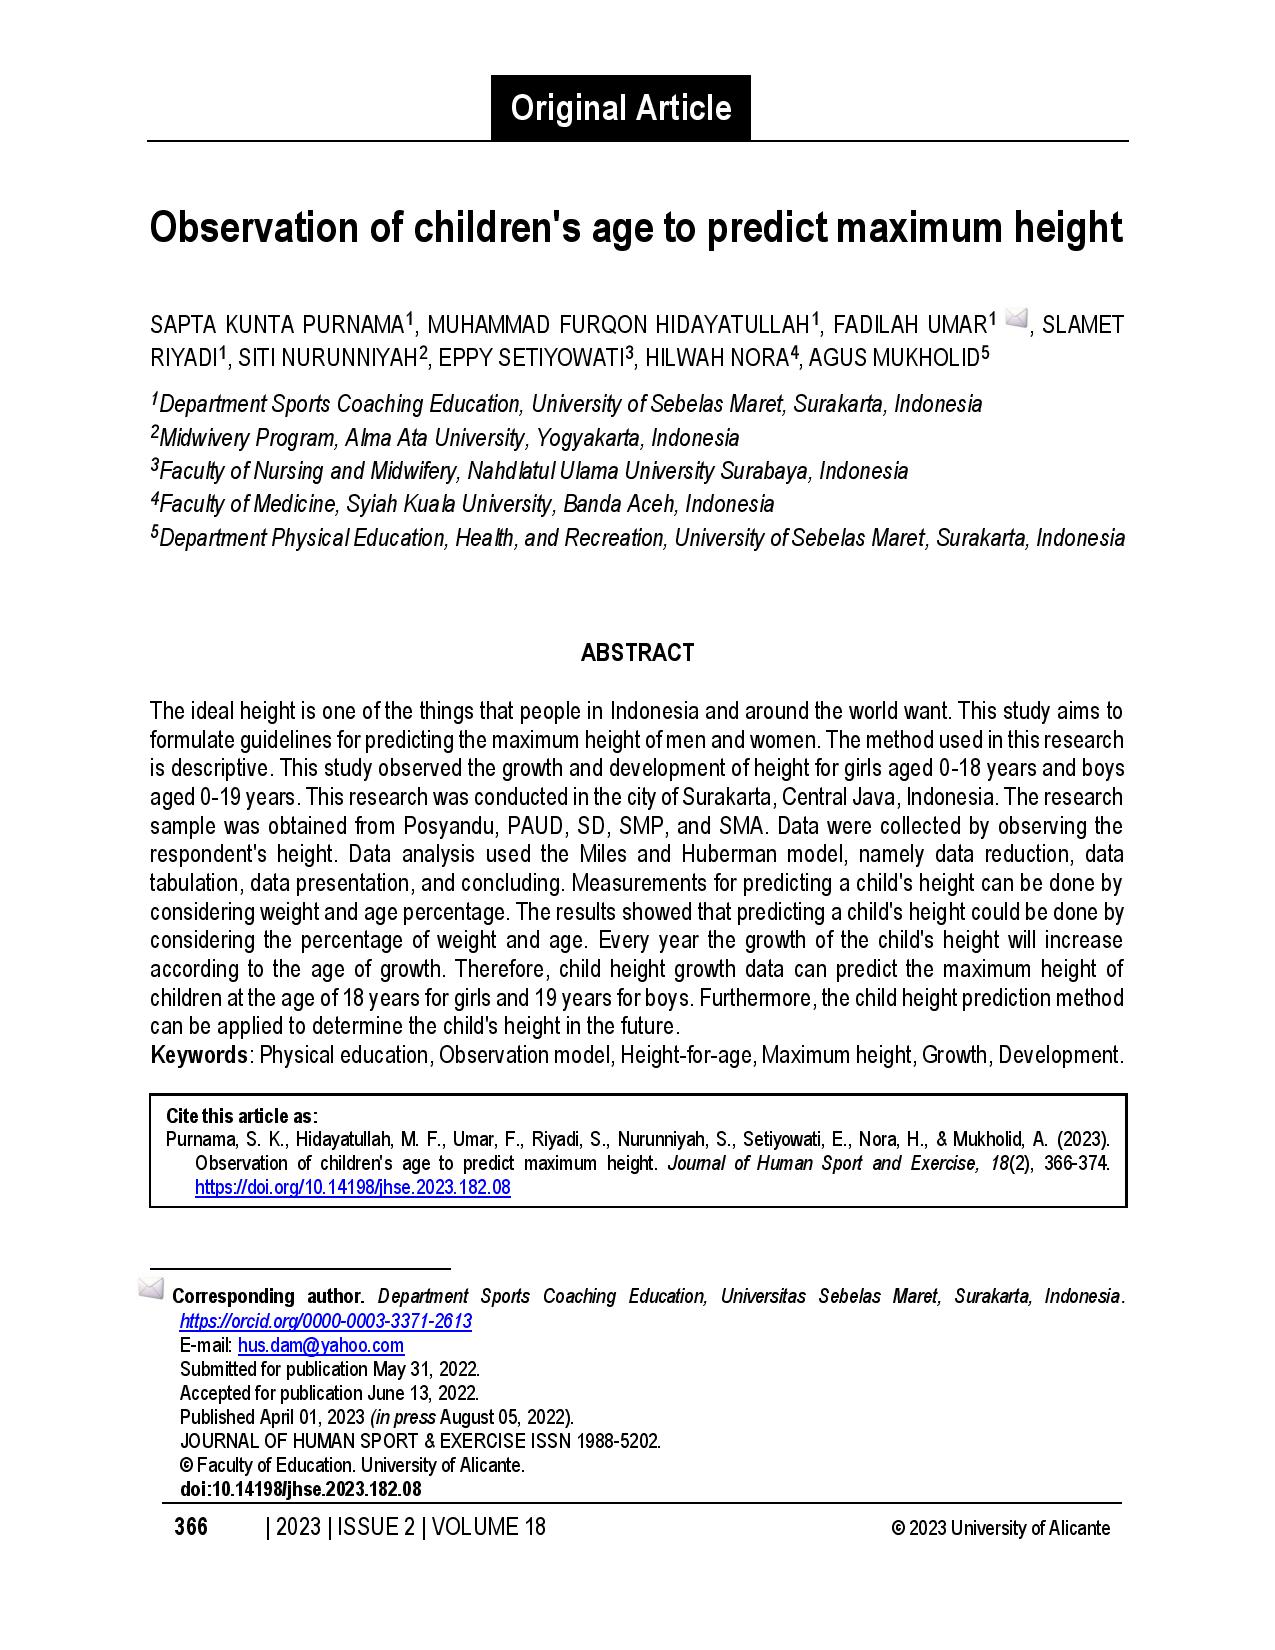 Observation of children's age to predict maximum height